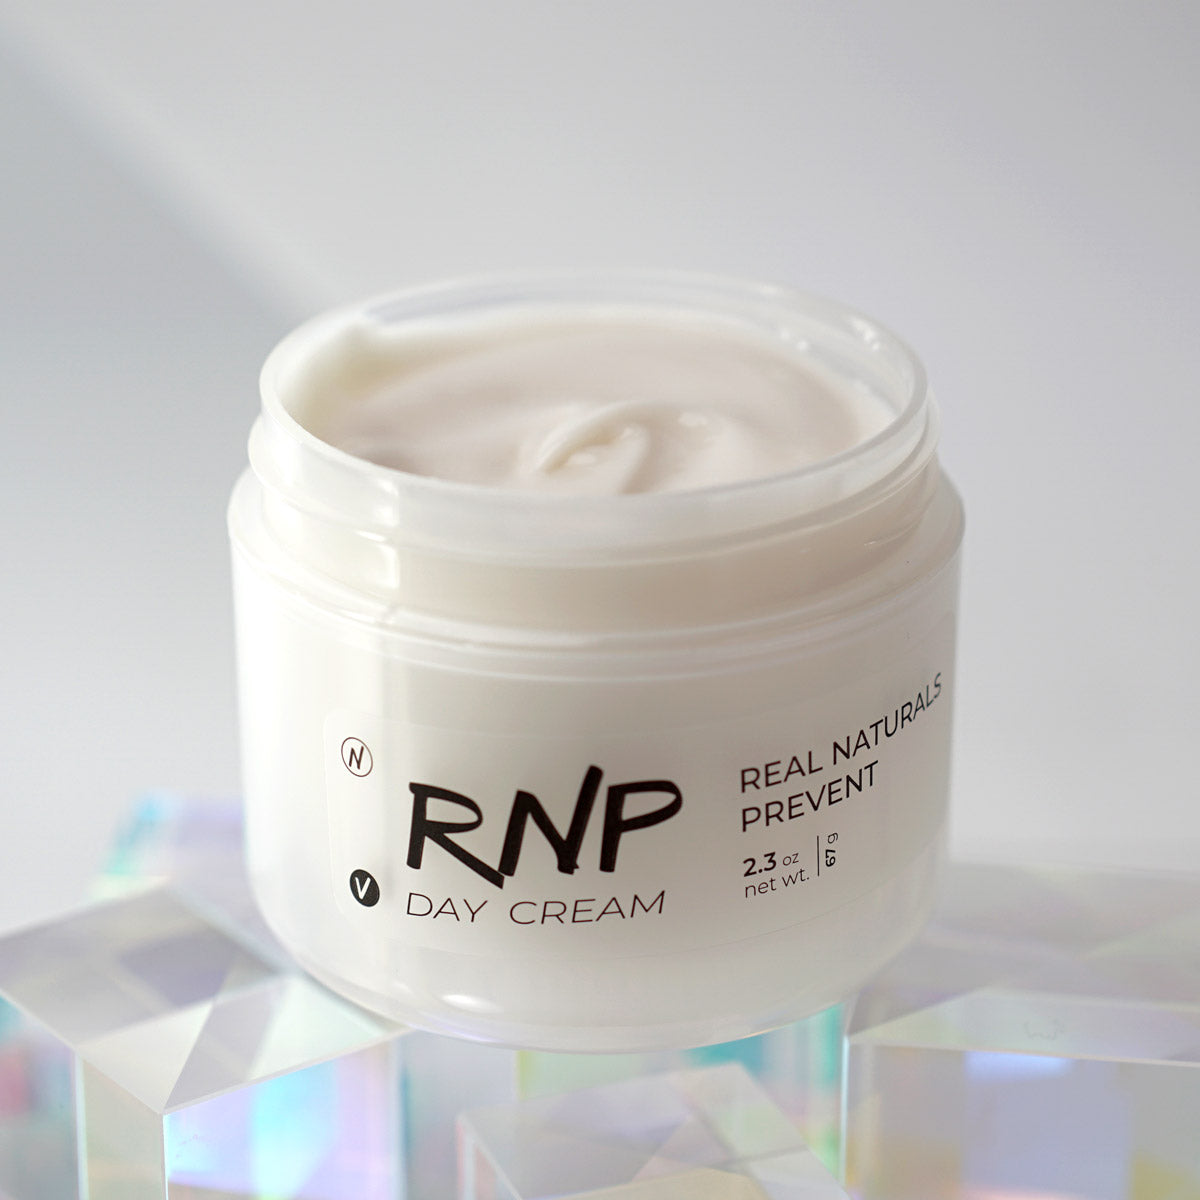 Real Naturals Prevent - 'RNP' Day Cream